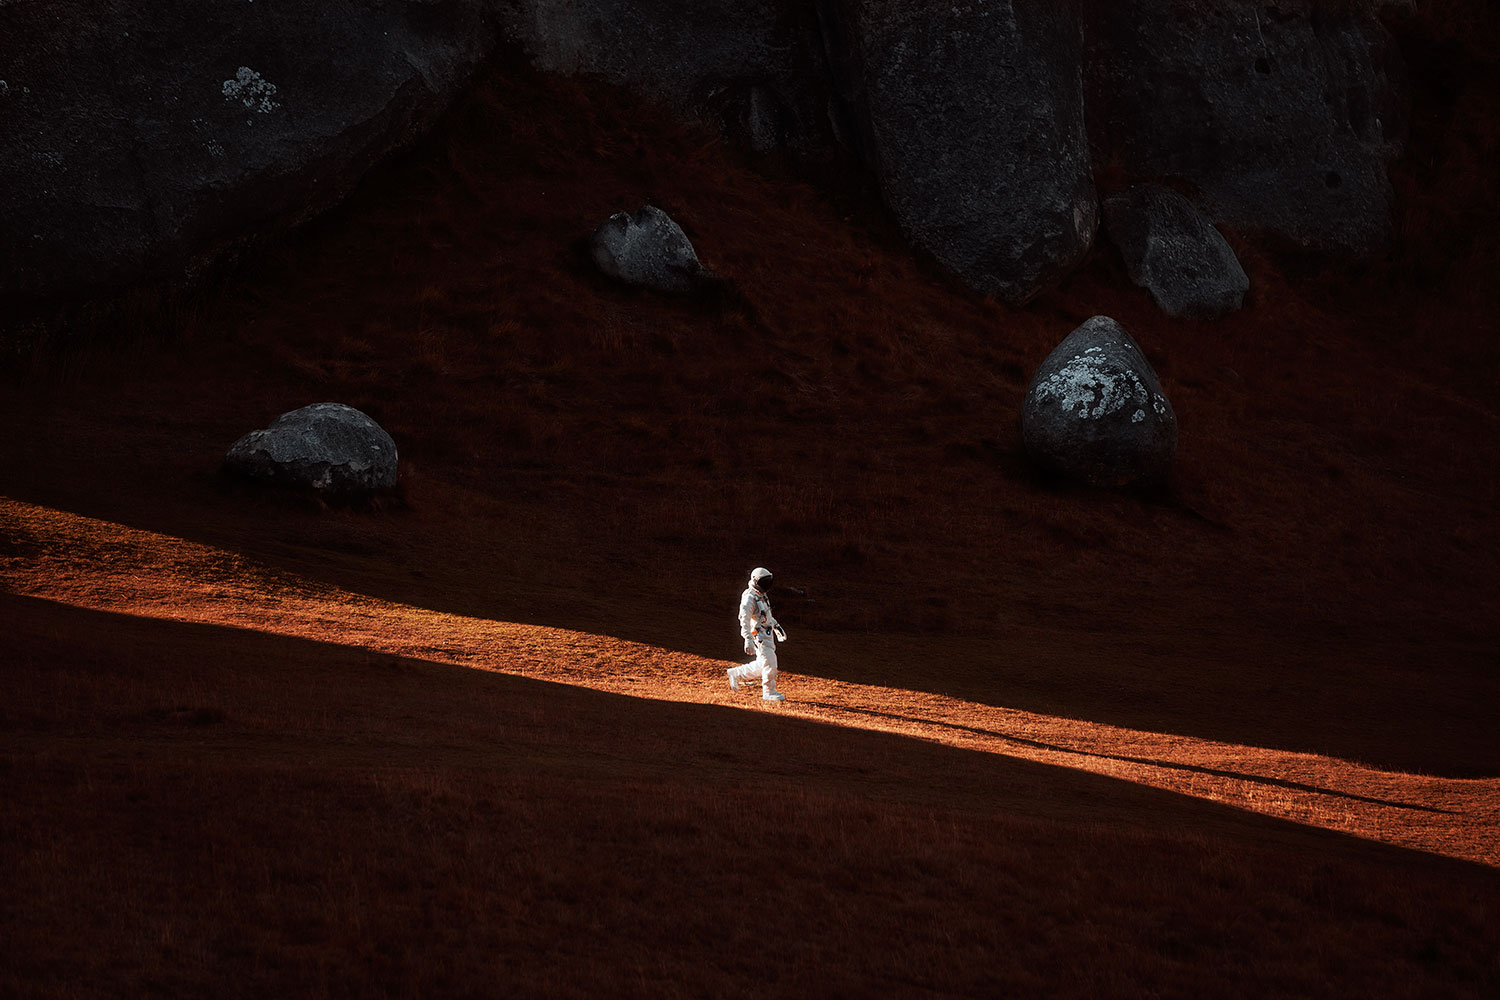 A Lone Astronaut Descends The Side Of A Mountain.